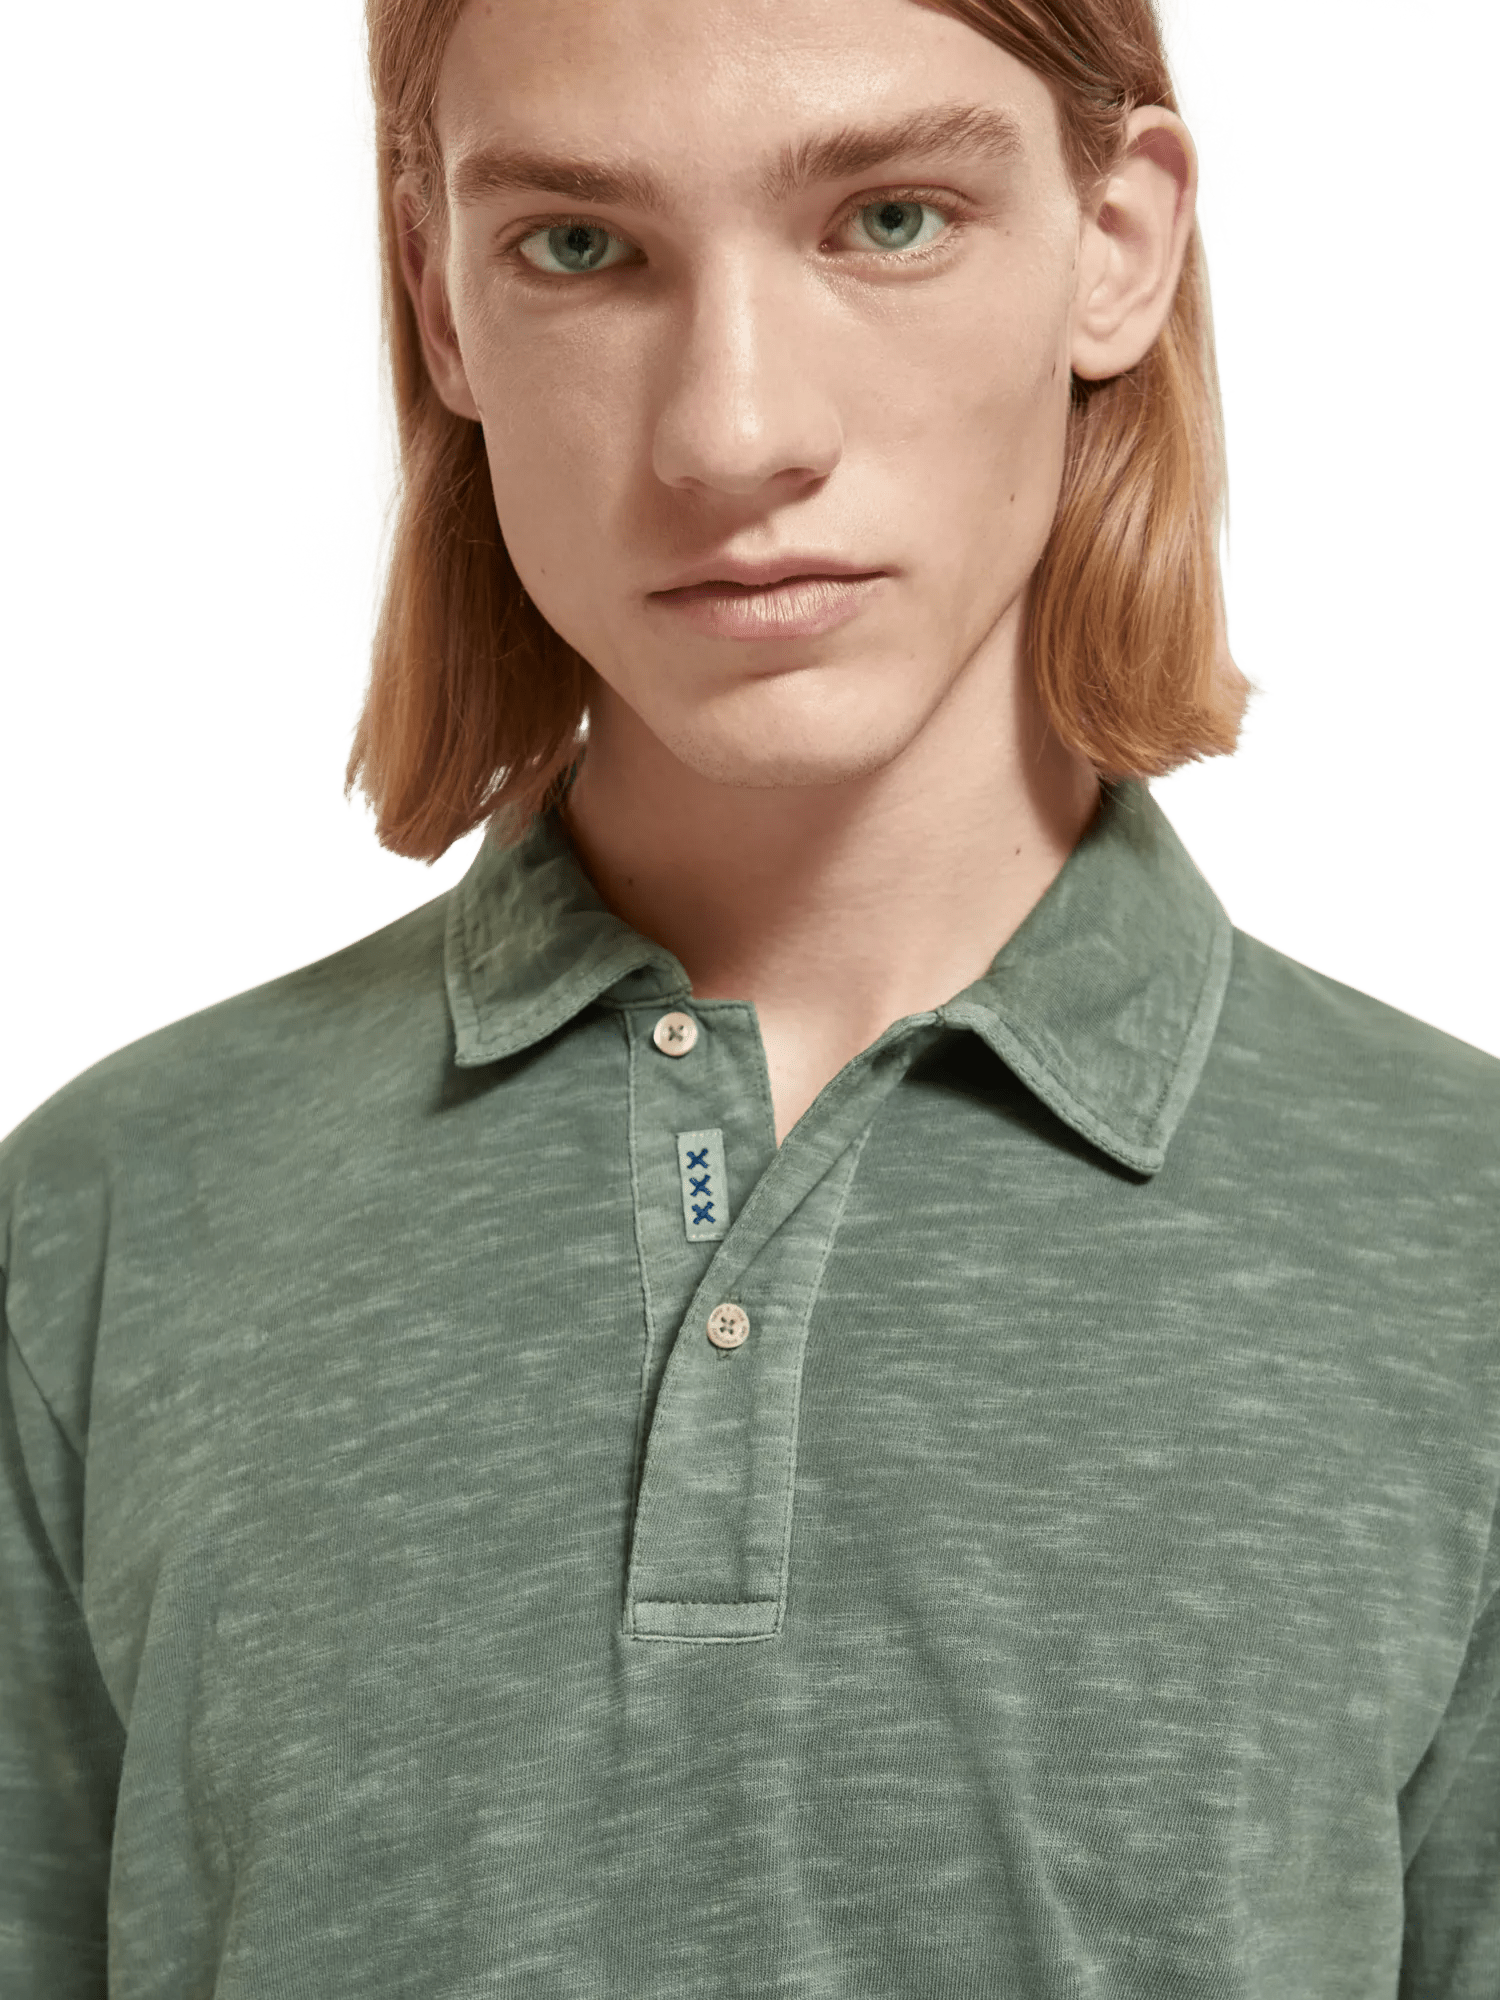 Scotch & Soda Garment-dyed jersey polo in Organic Cotton 174564_1081_MDL_DTL1